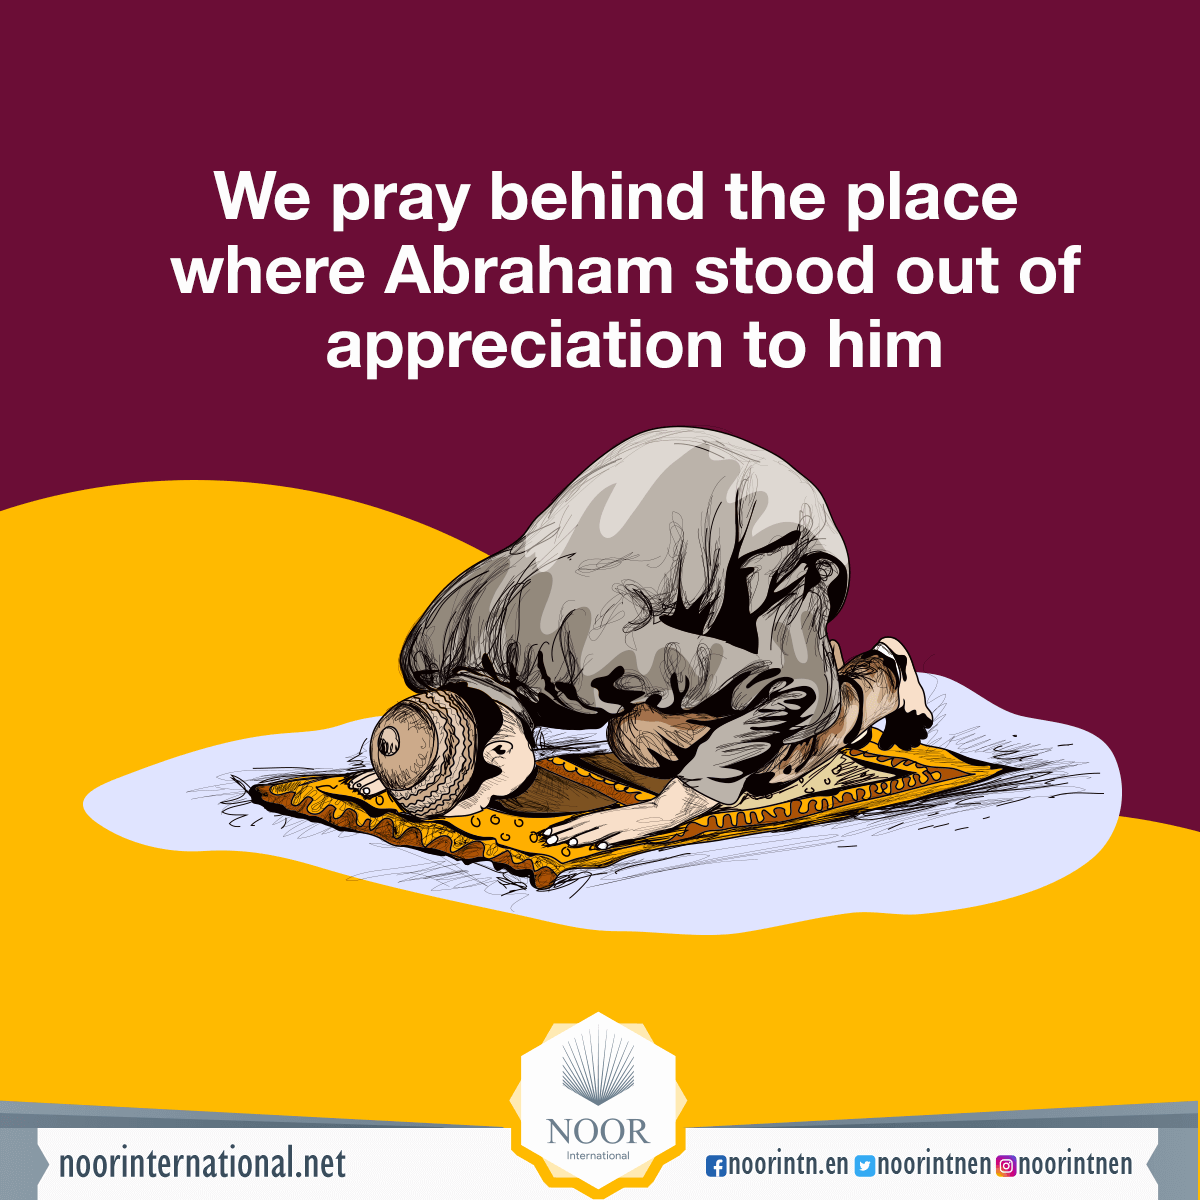 We pray behind the place where Abraham stood out of appreciation to him.